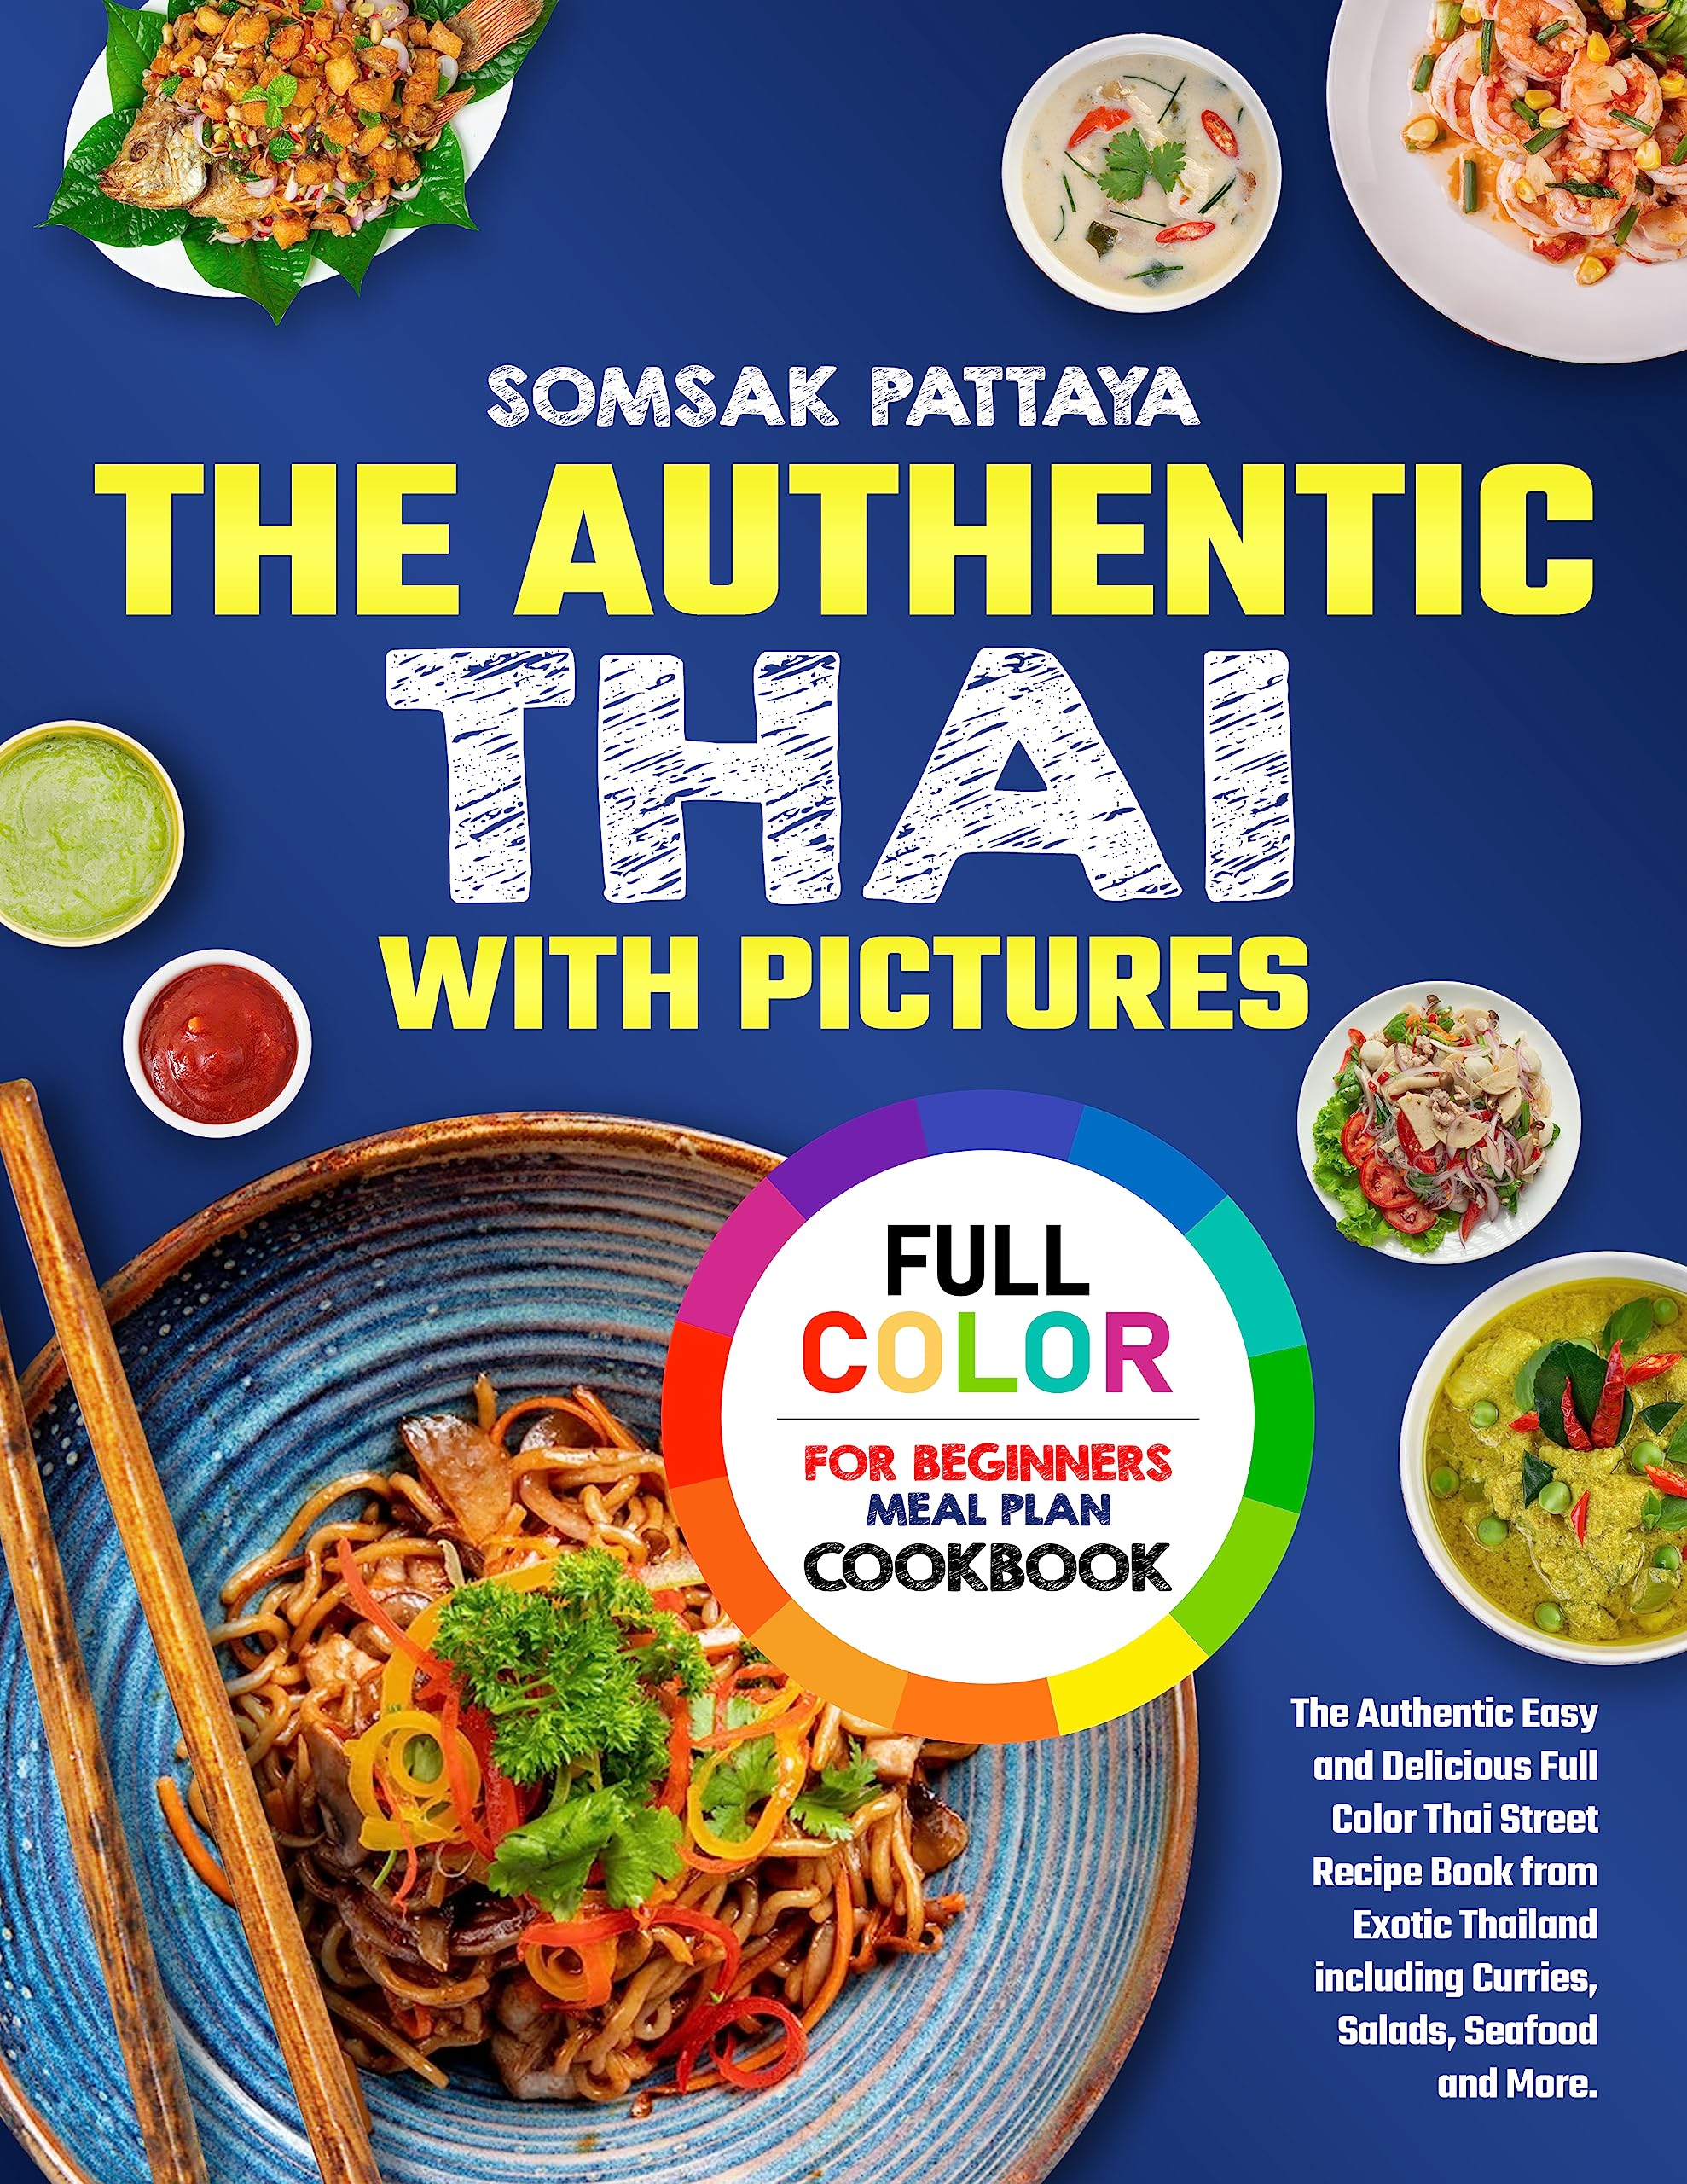 The Authentic Thai Cookbook with Pictures for Beginners: Easy and Delicious Full Color Thai Street Recipe Book from Exotic Thailand Including Curries, Salads, Seafood and More